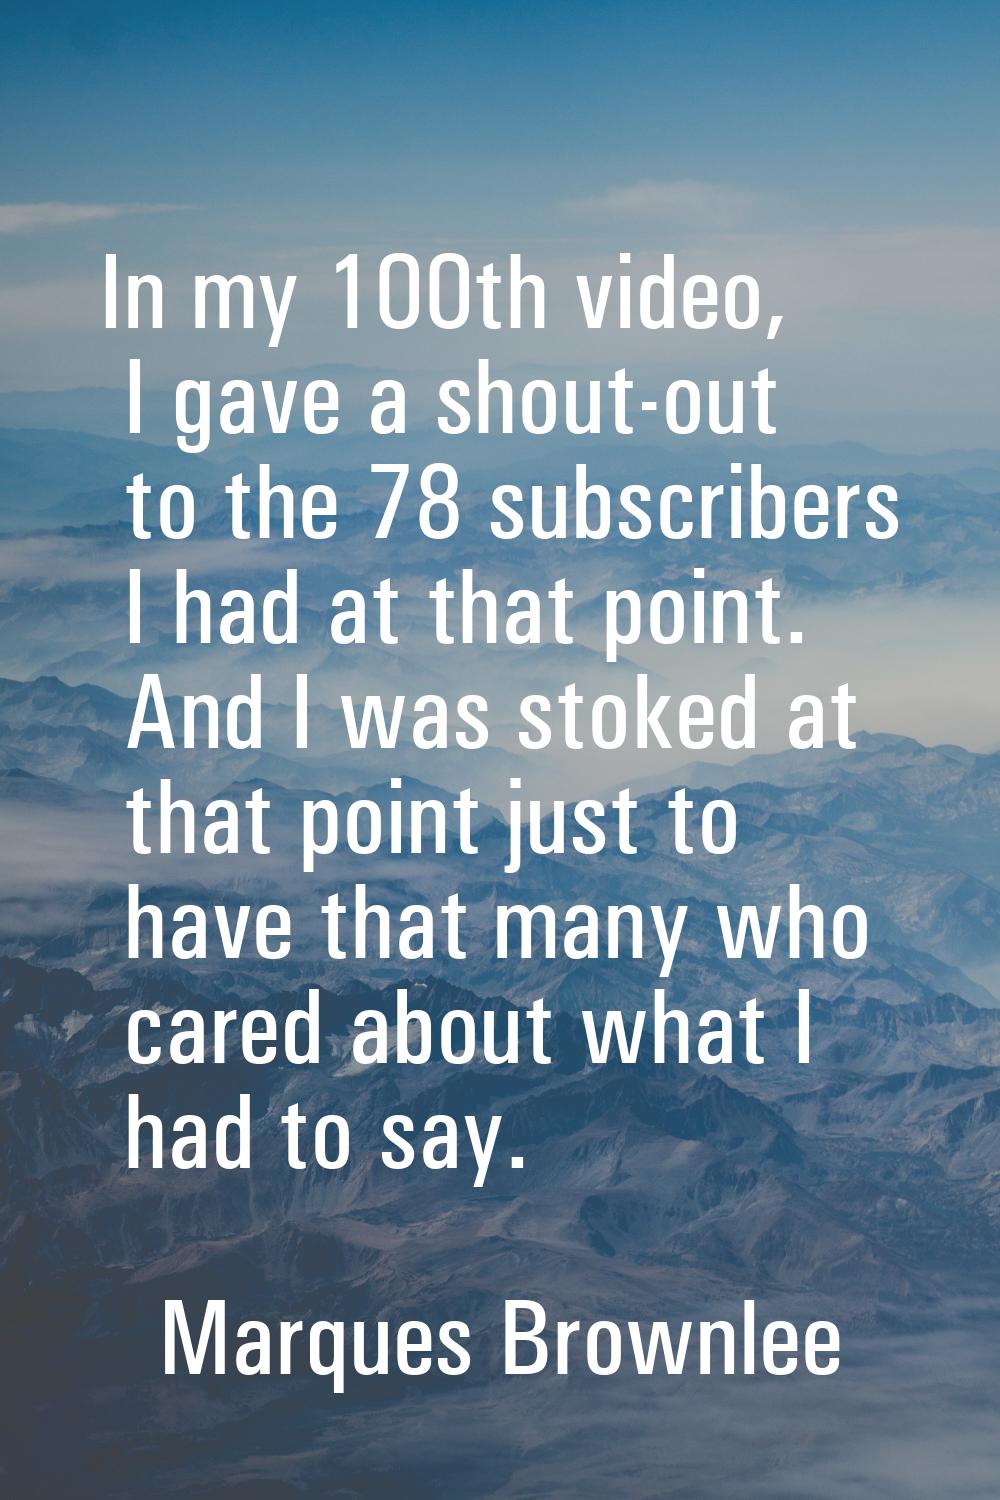 In my 100th video, I gave a shout-out to the 78 subscribers I had at that point. And I was stoked a